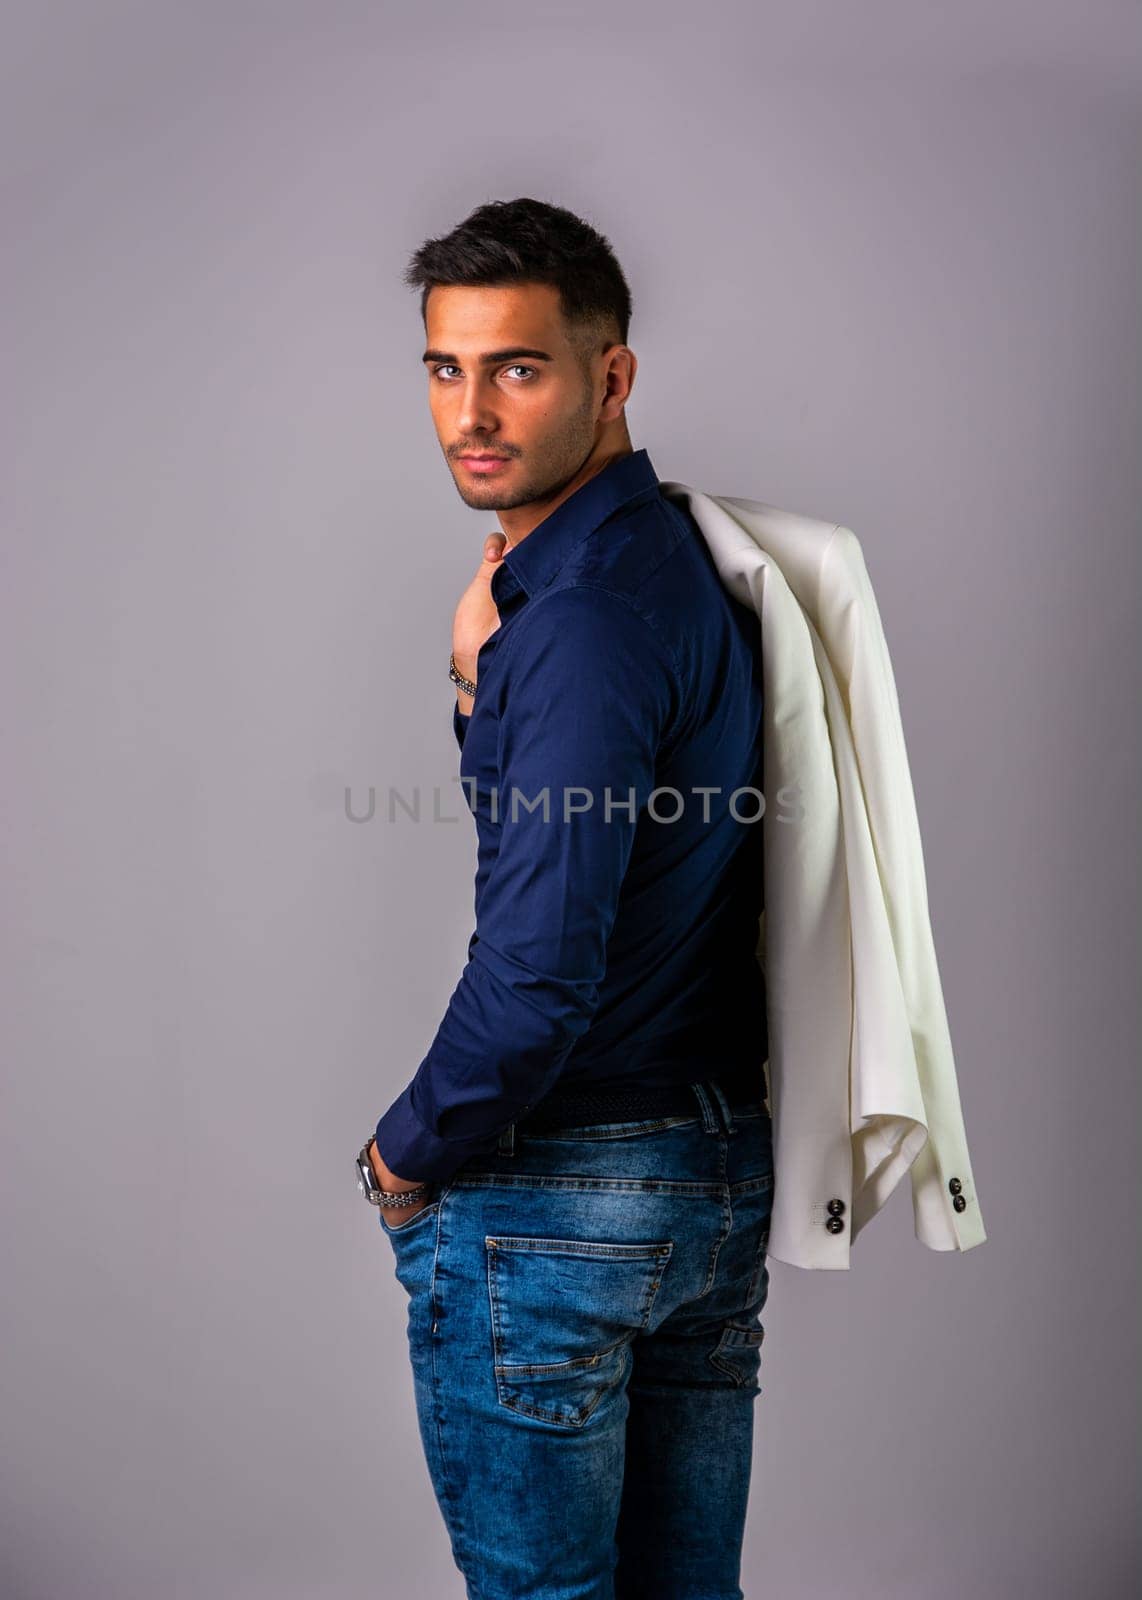 A man in a blue shirt and jeans with a jacket on his back. Photo of a man wearing casual clothing with a jacket slung over his shoulder in studio shot on grey background